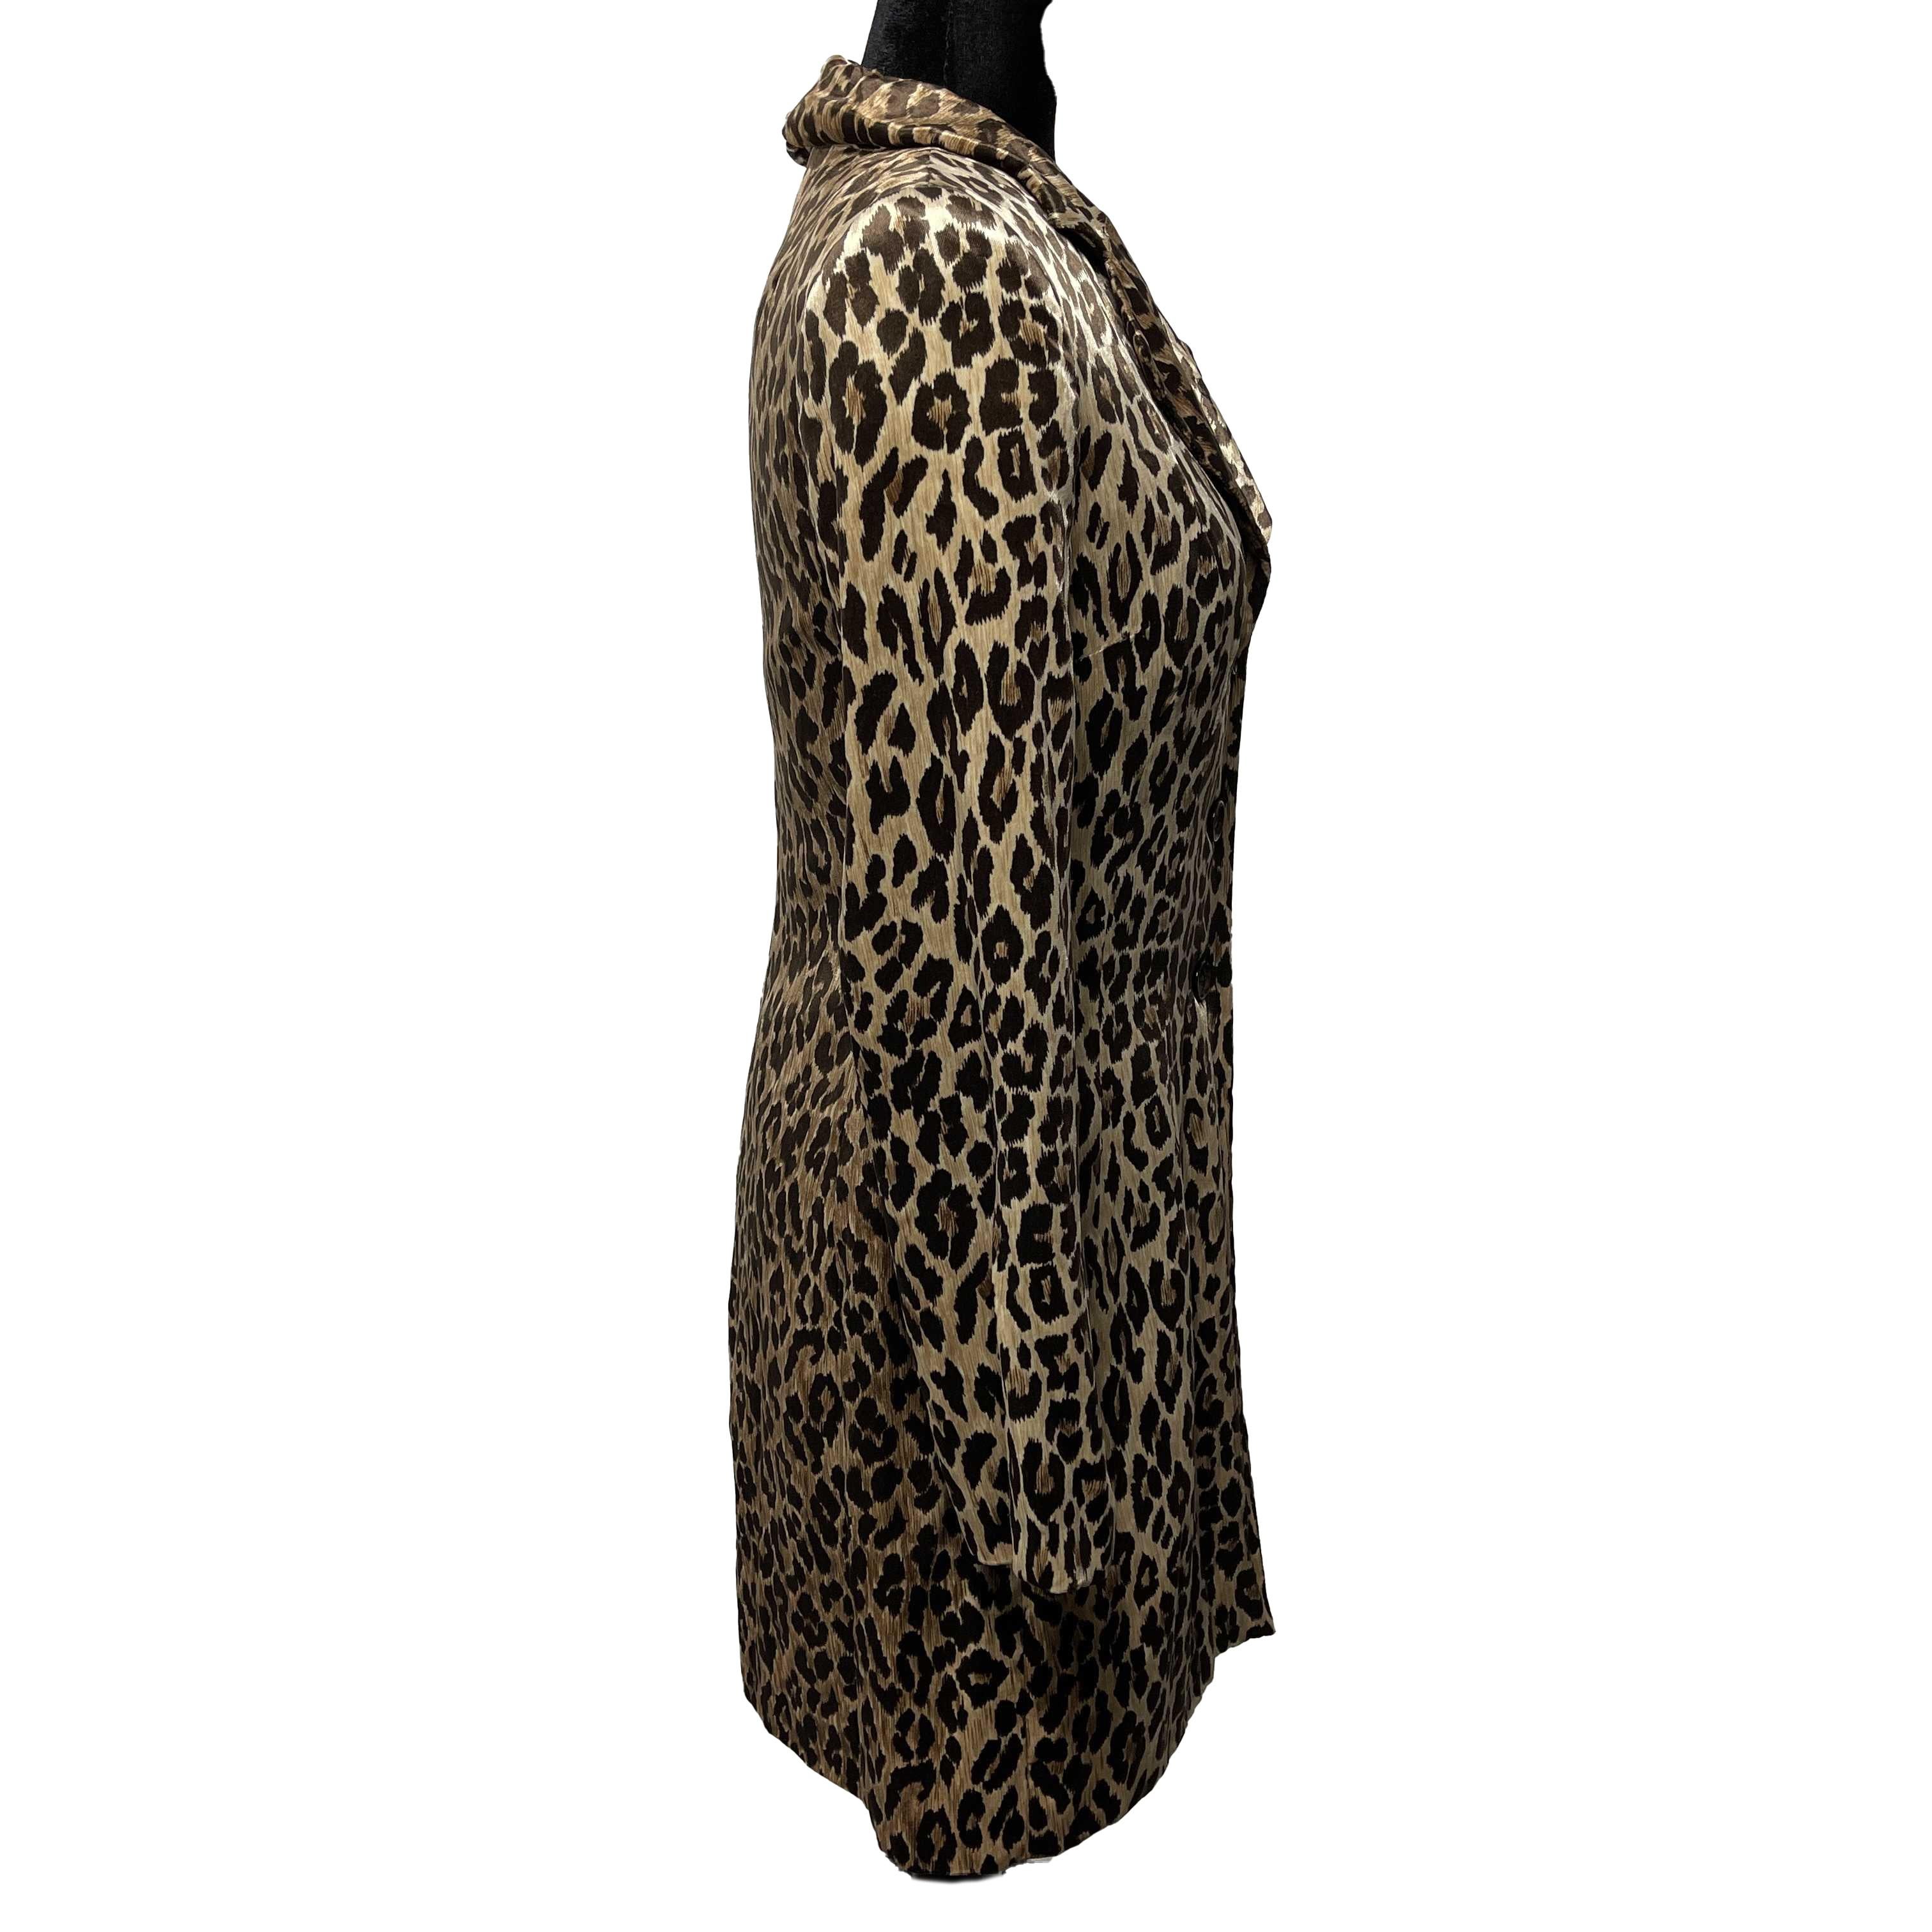 Dolce & Gabbana Vintage Leopard Print Viscose Trench Coat 40 US M In Excellent Condition For Sale In Sanford, FL